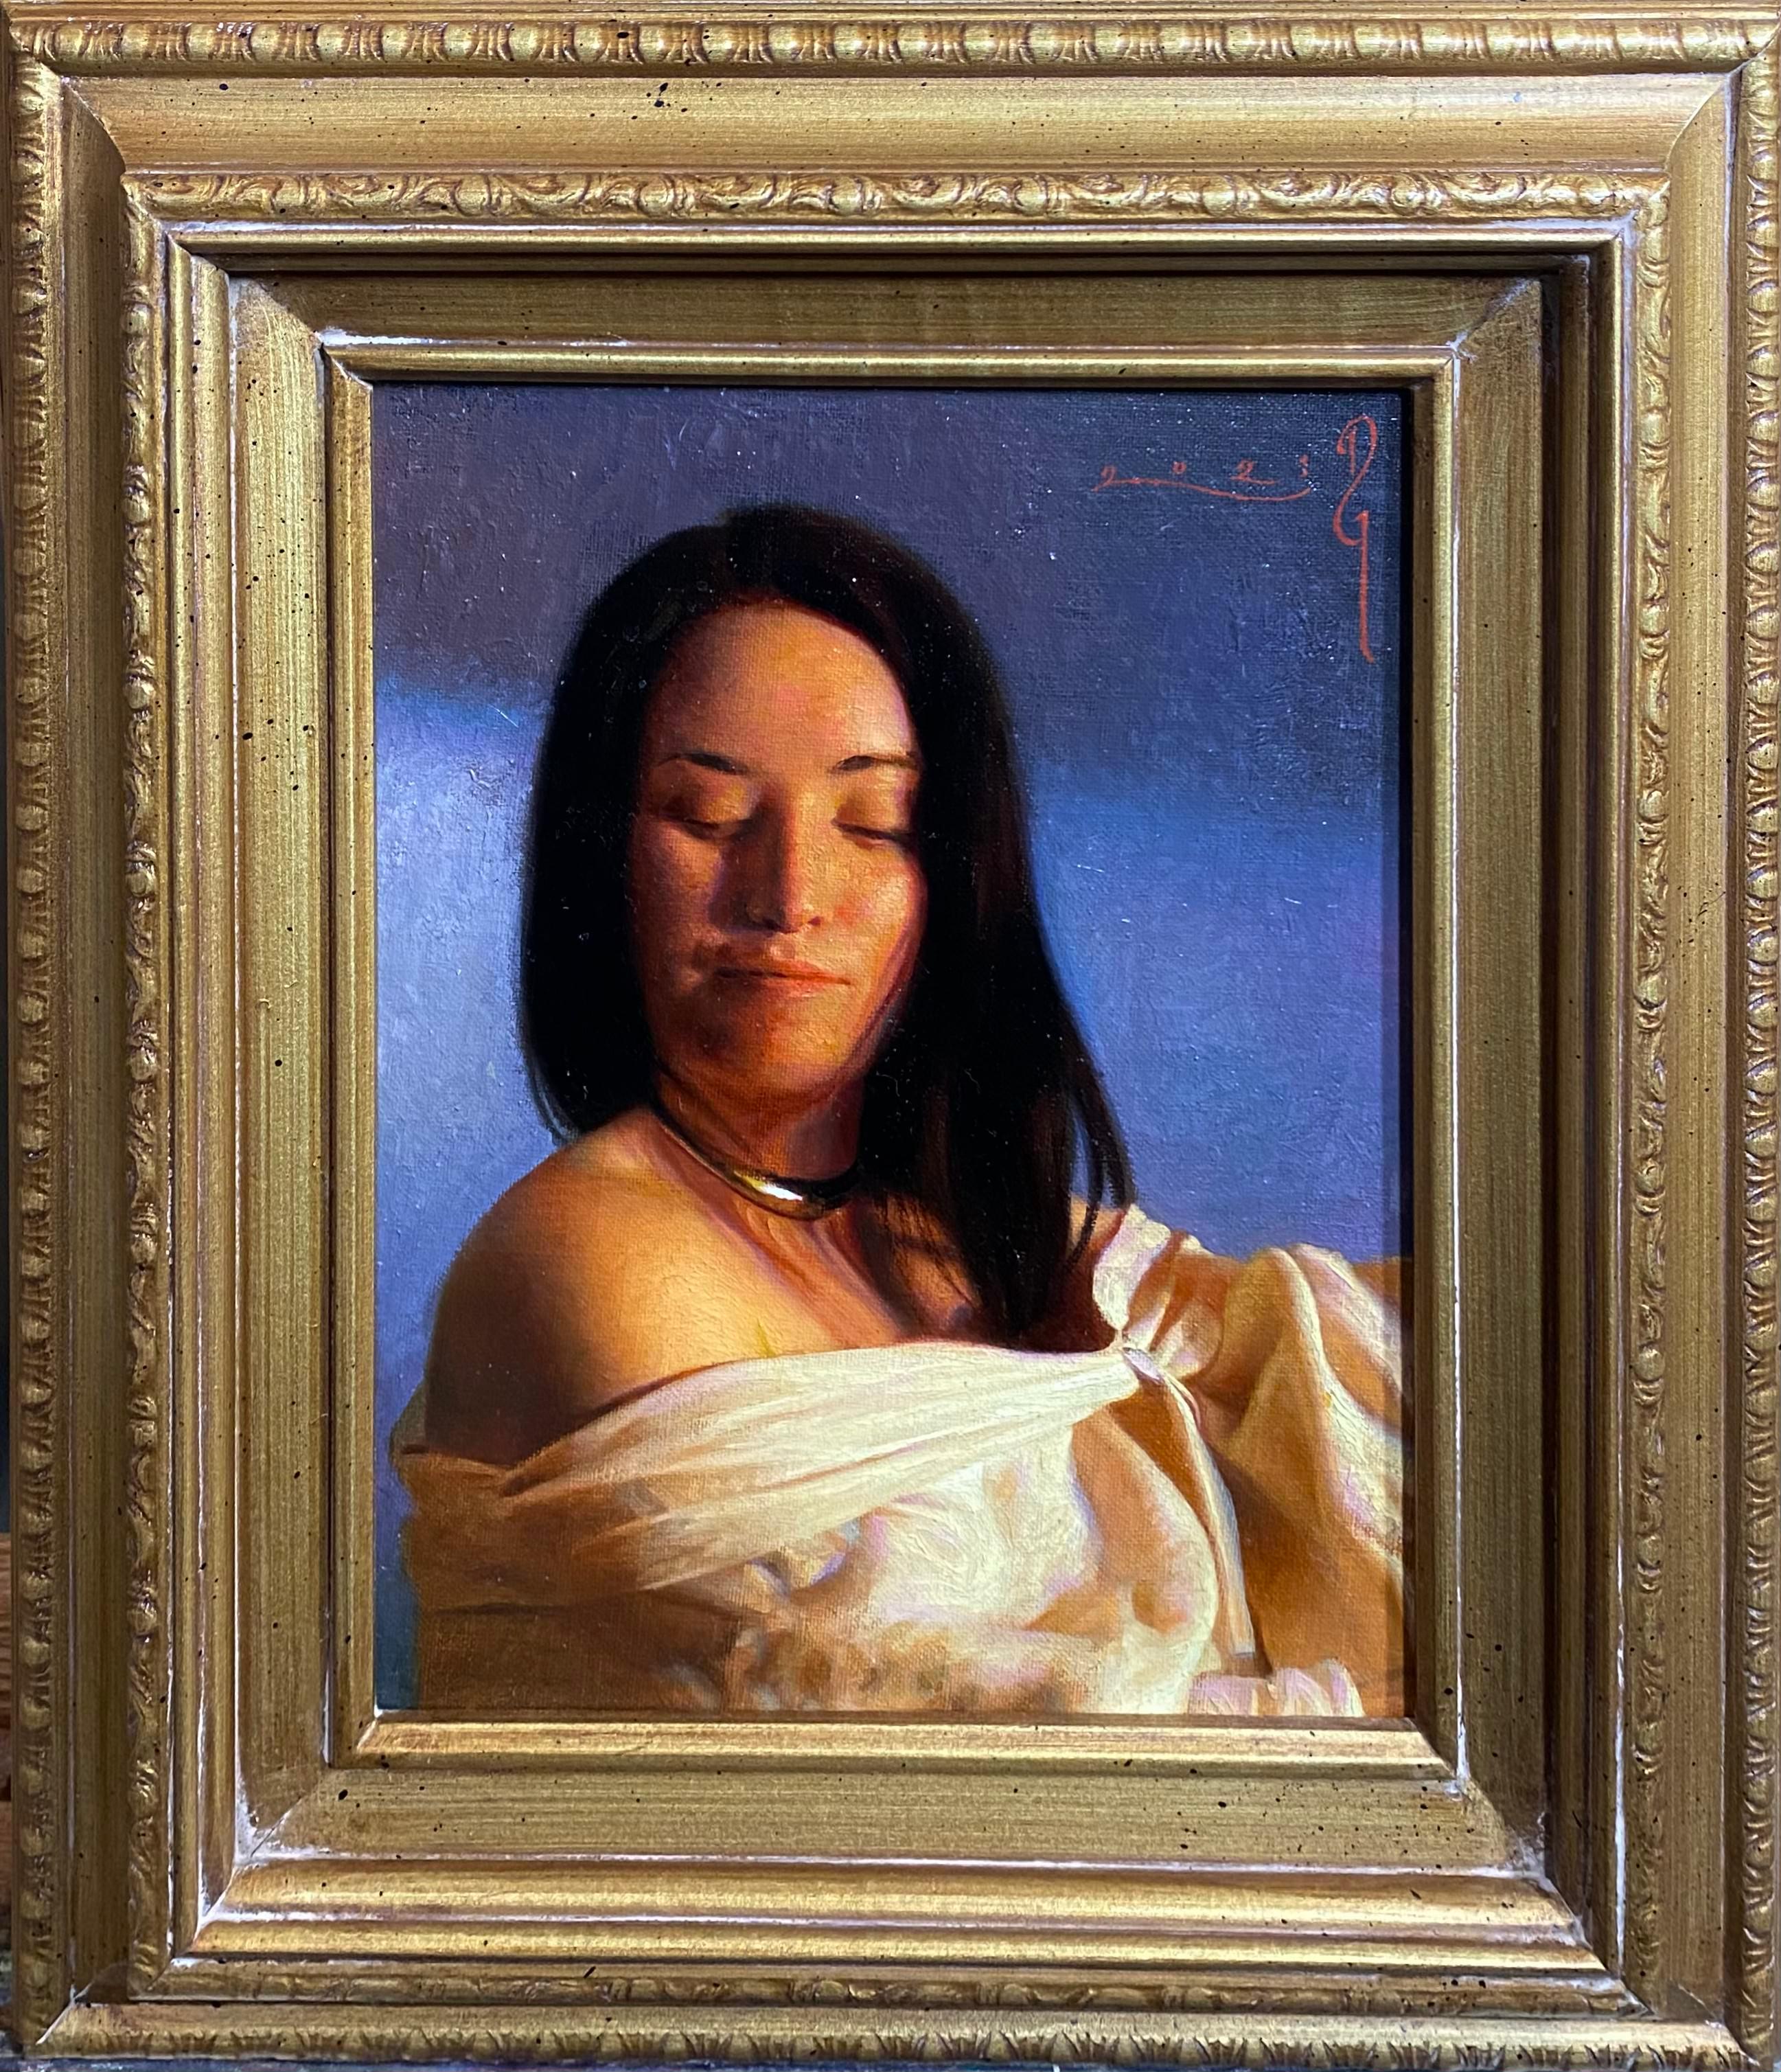 Diego Glazer Portrait Painting - "You'll See" Oil Painting